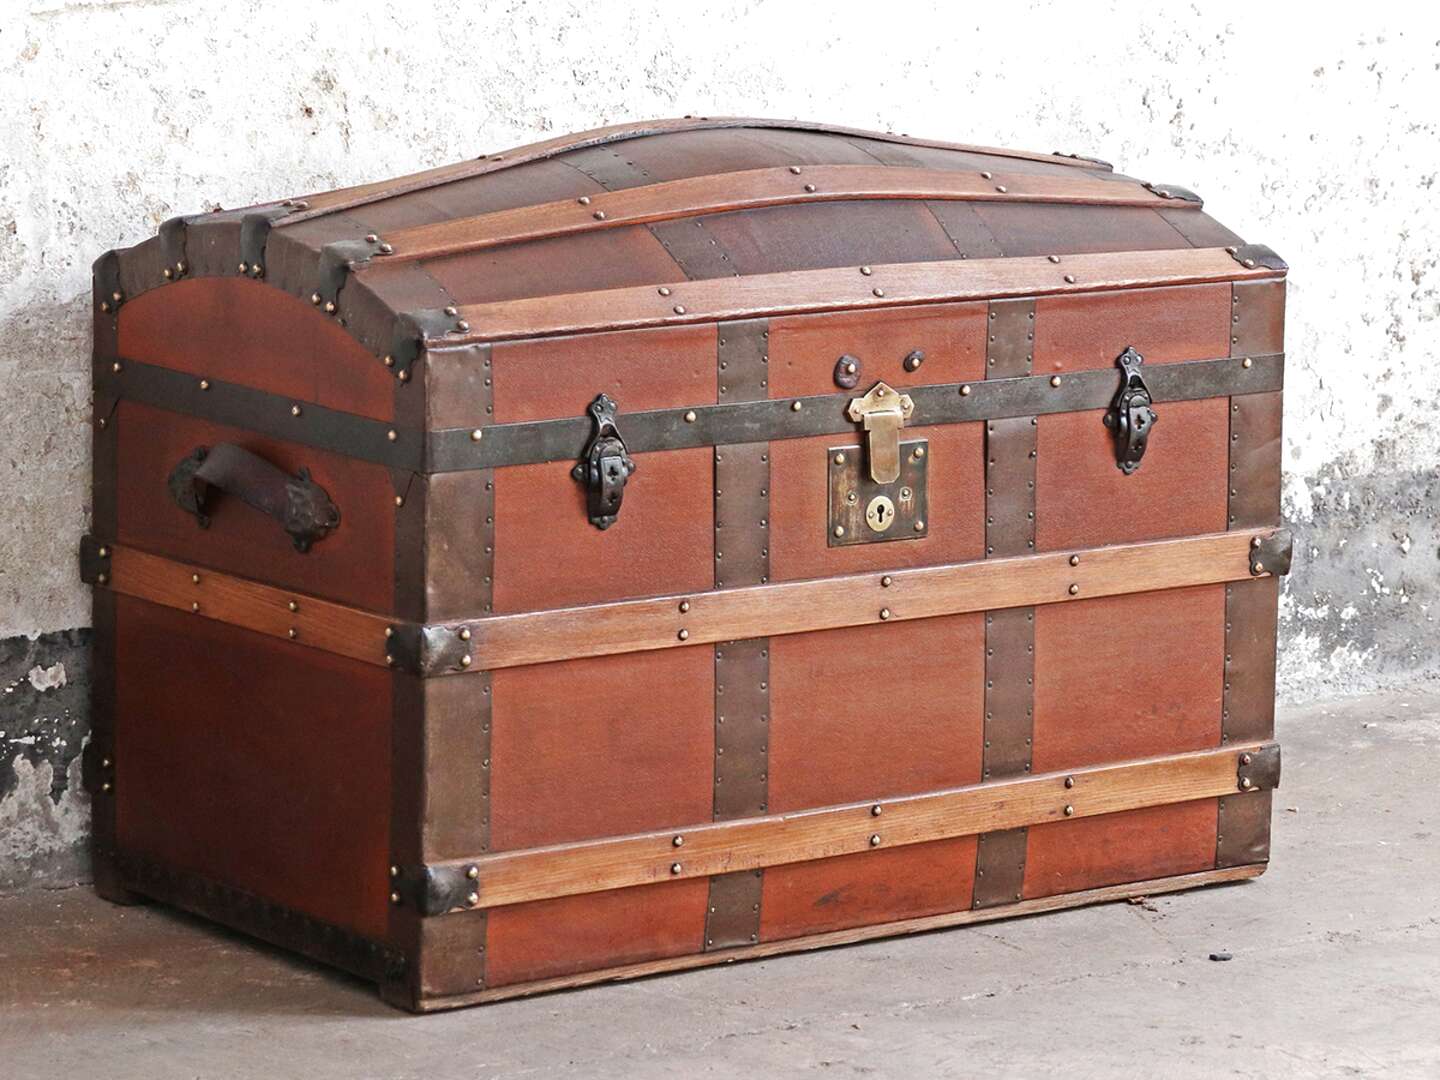 Vintage Travel Trunk for sale in UK | View 74 bargains